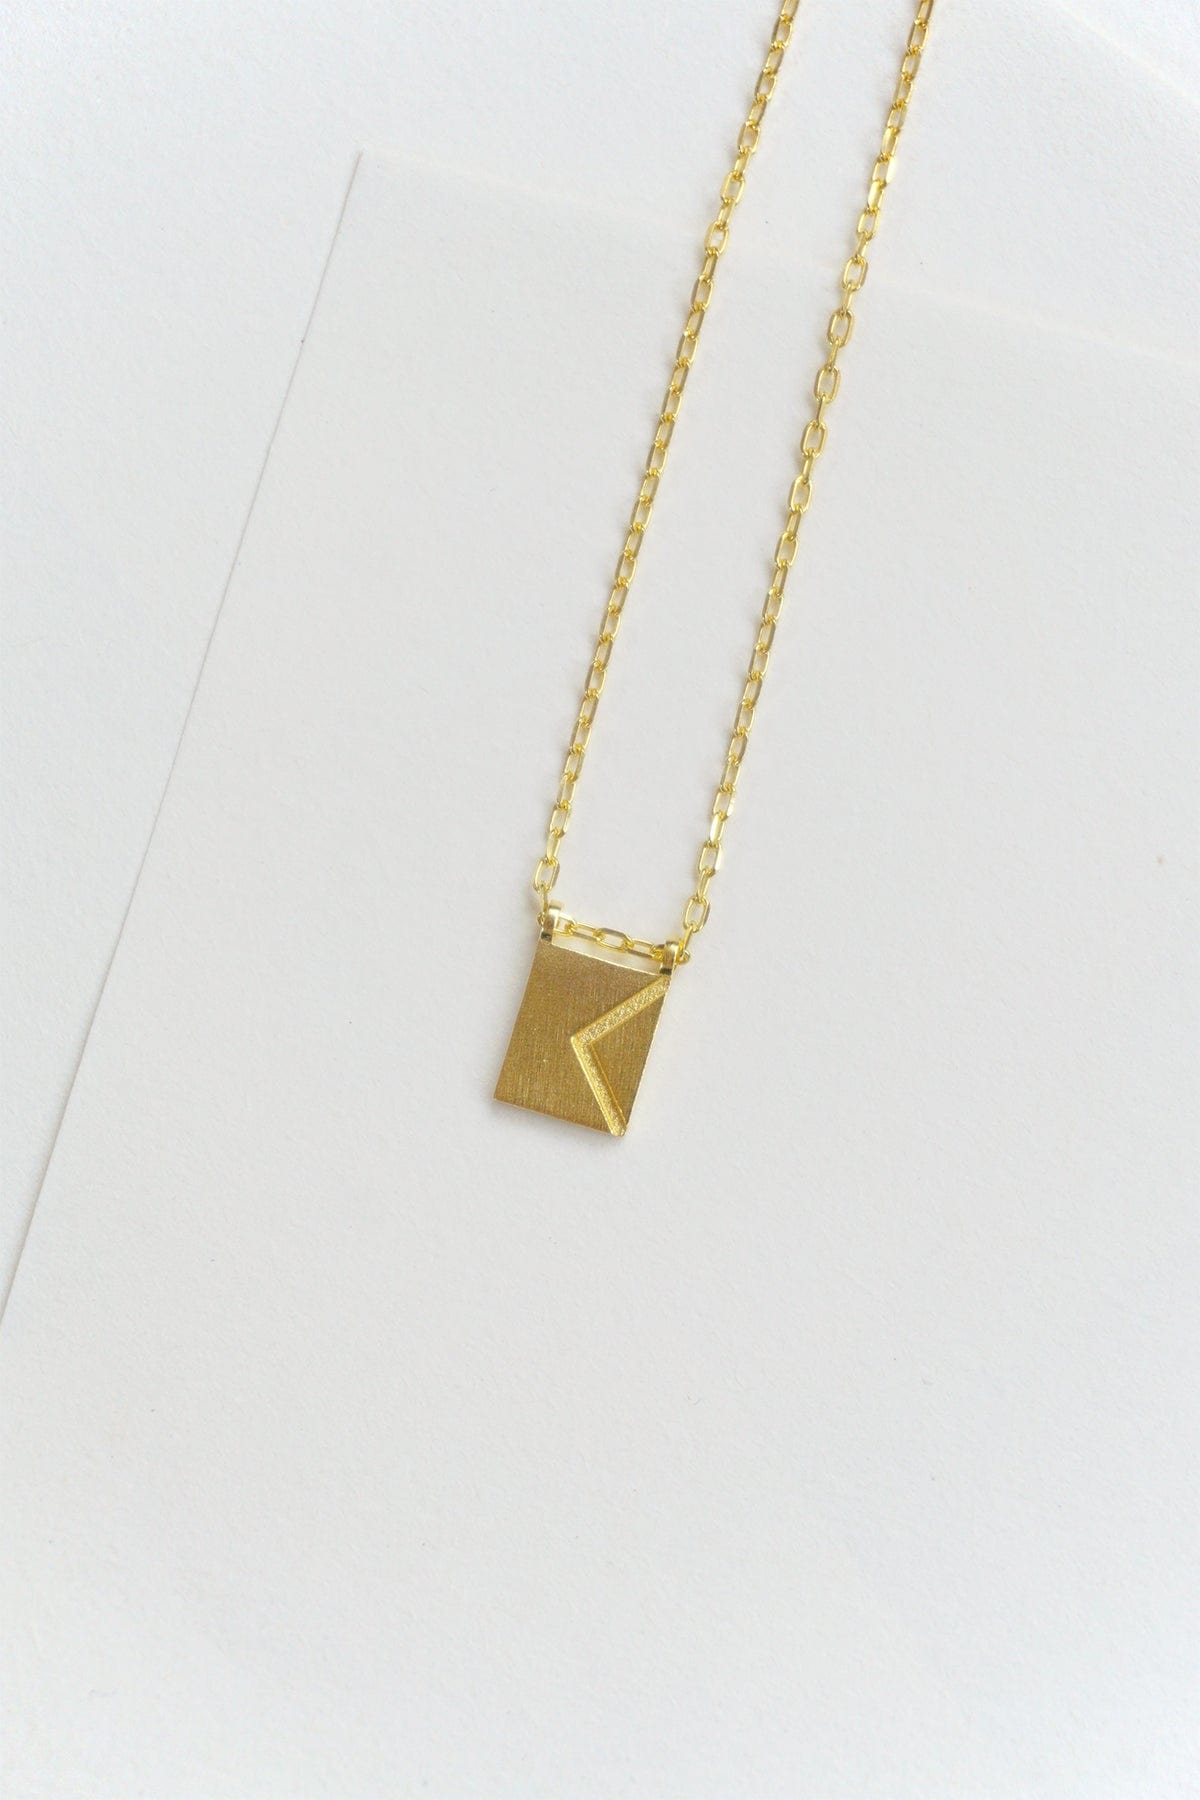 Initial Necklace - Gold Plated Gold / K AR.M ANNA ROSA MOSCHOUTI